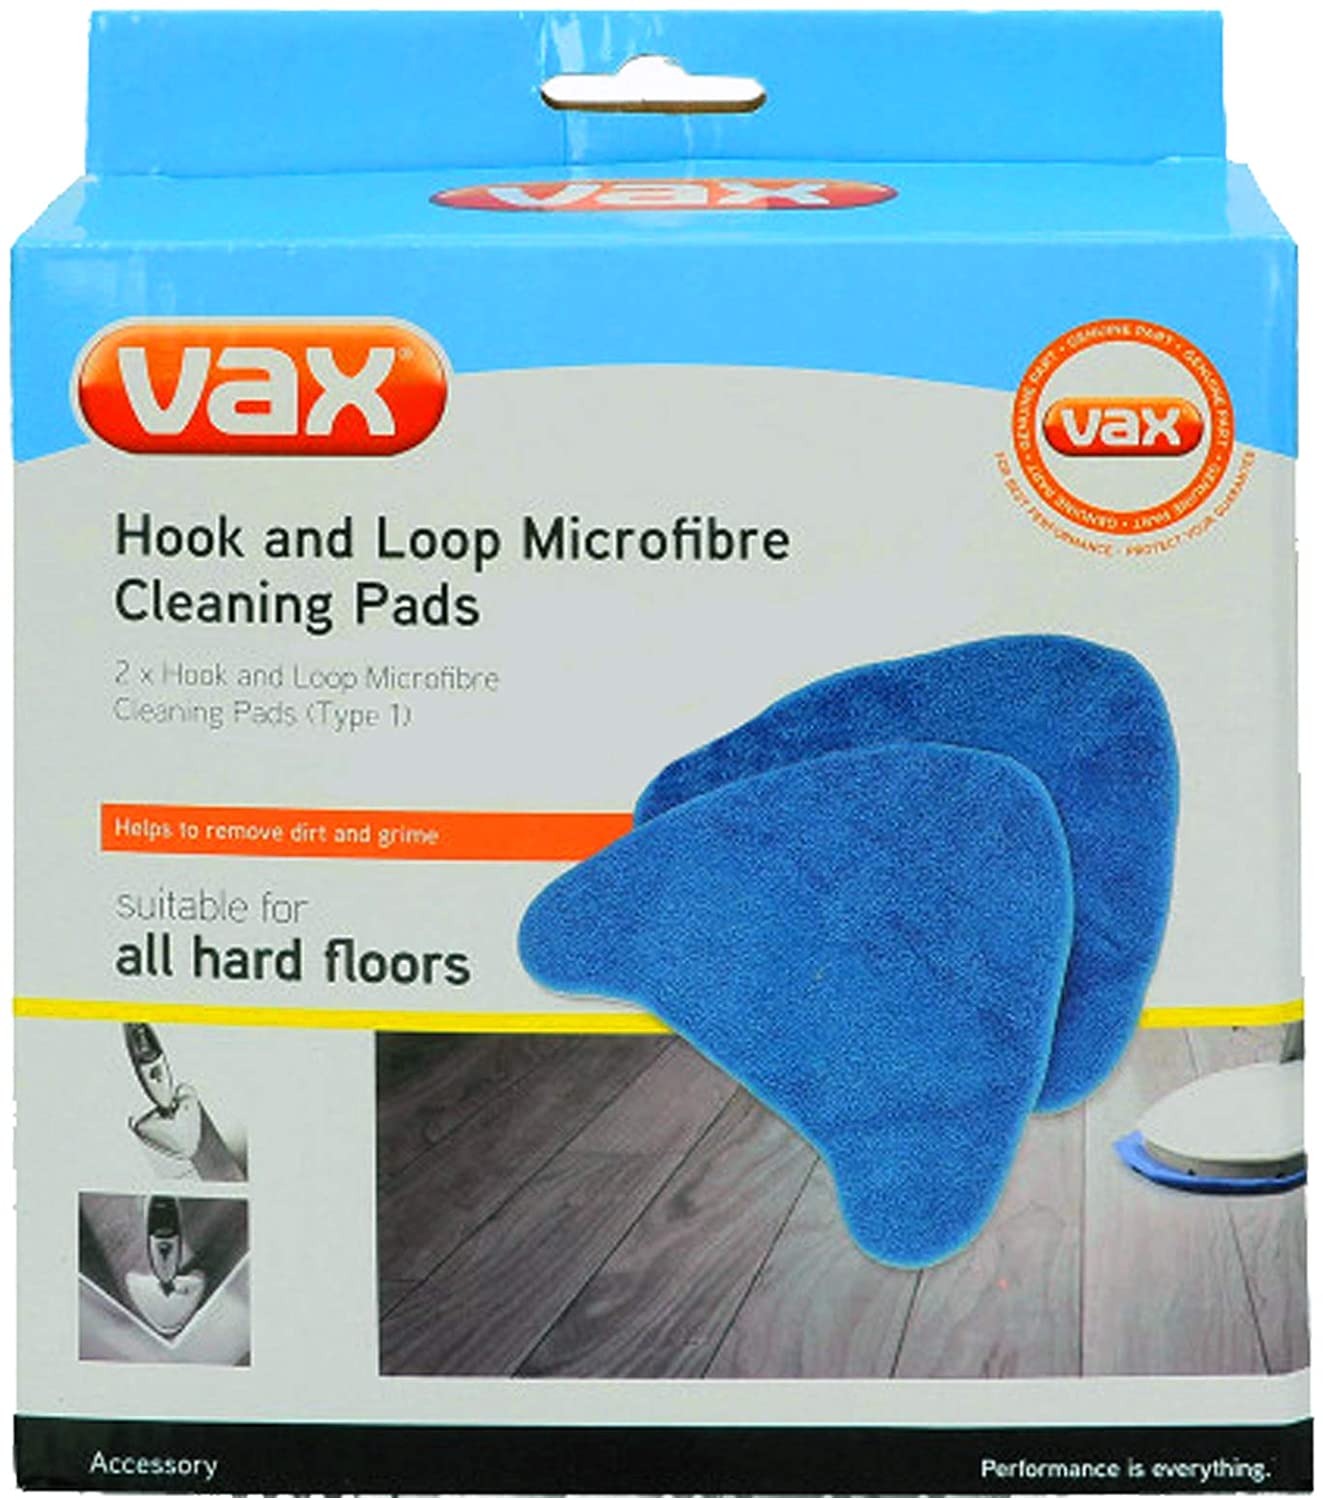 Vax-Genuine-S86-SF-B-S86-SF-C-S86-SF-P-S86-SF-T-Steam-Cleaner-Mop-Hook-and-Loop-Microfibre-Cleaning-Pad-Covers-Pack-of-2